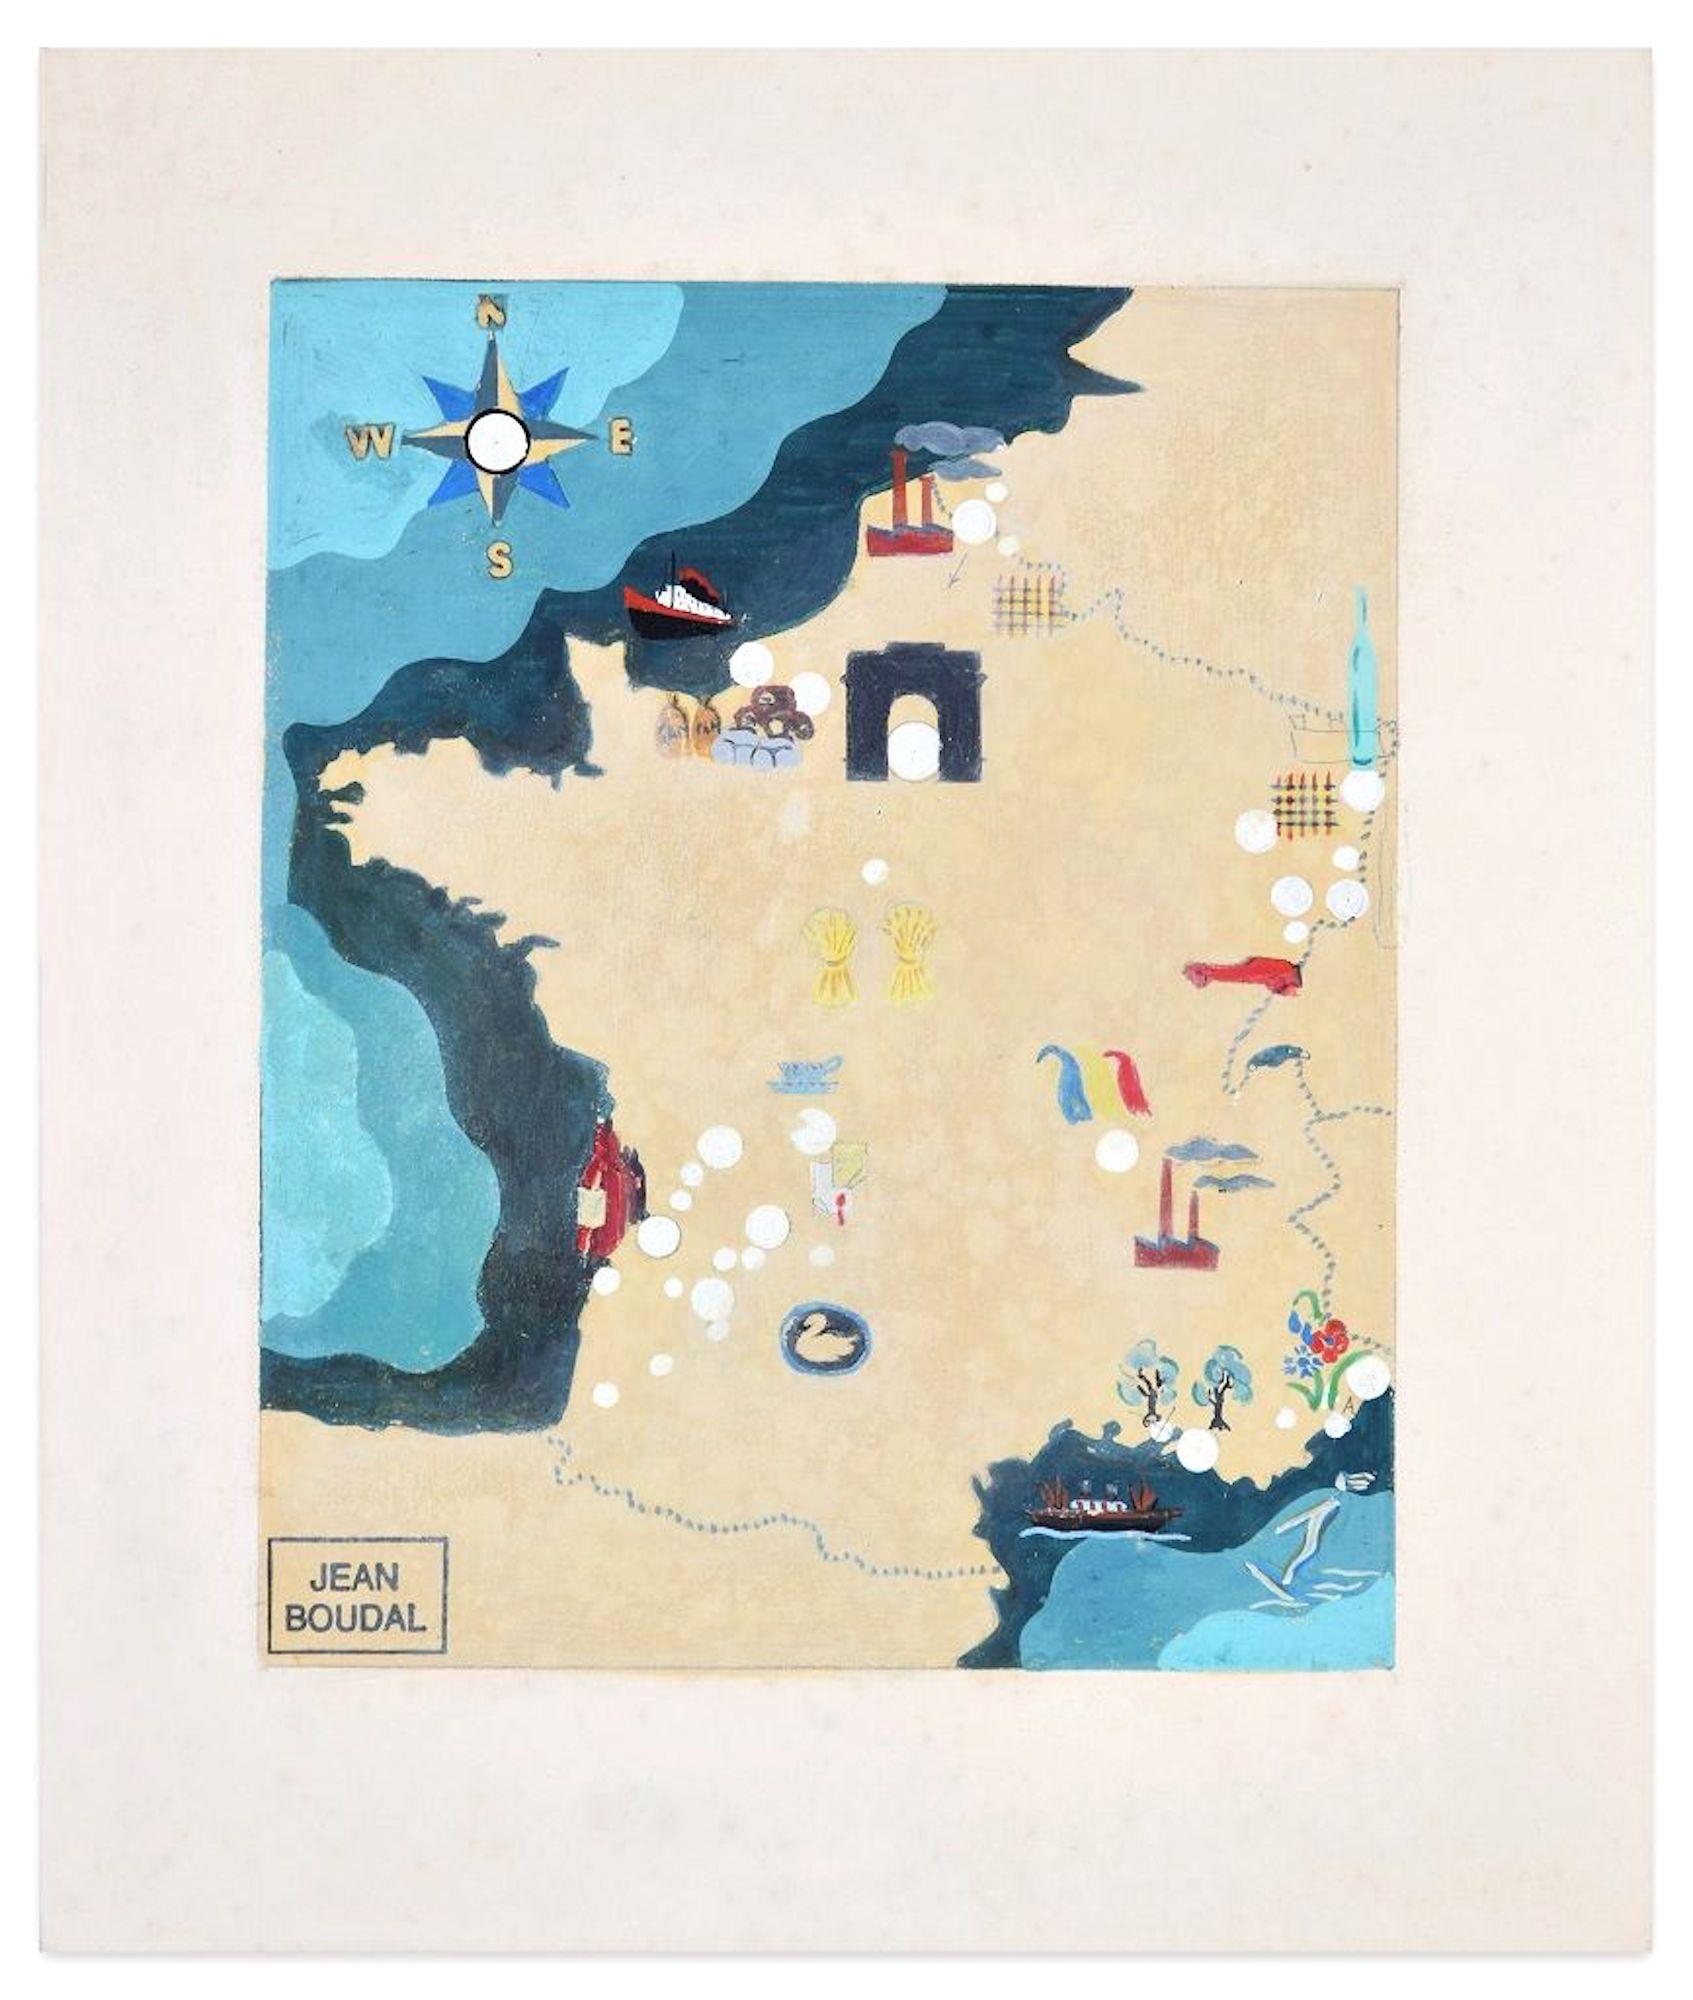 Treasure Hunt is an original tempera on paper, realized by Jean Boudal in the 1950s. 

Artist's name in block letters on lower-left corner.

This very nice little painting represents a map with stylized drawings. At the top left, the compass rose